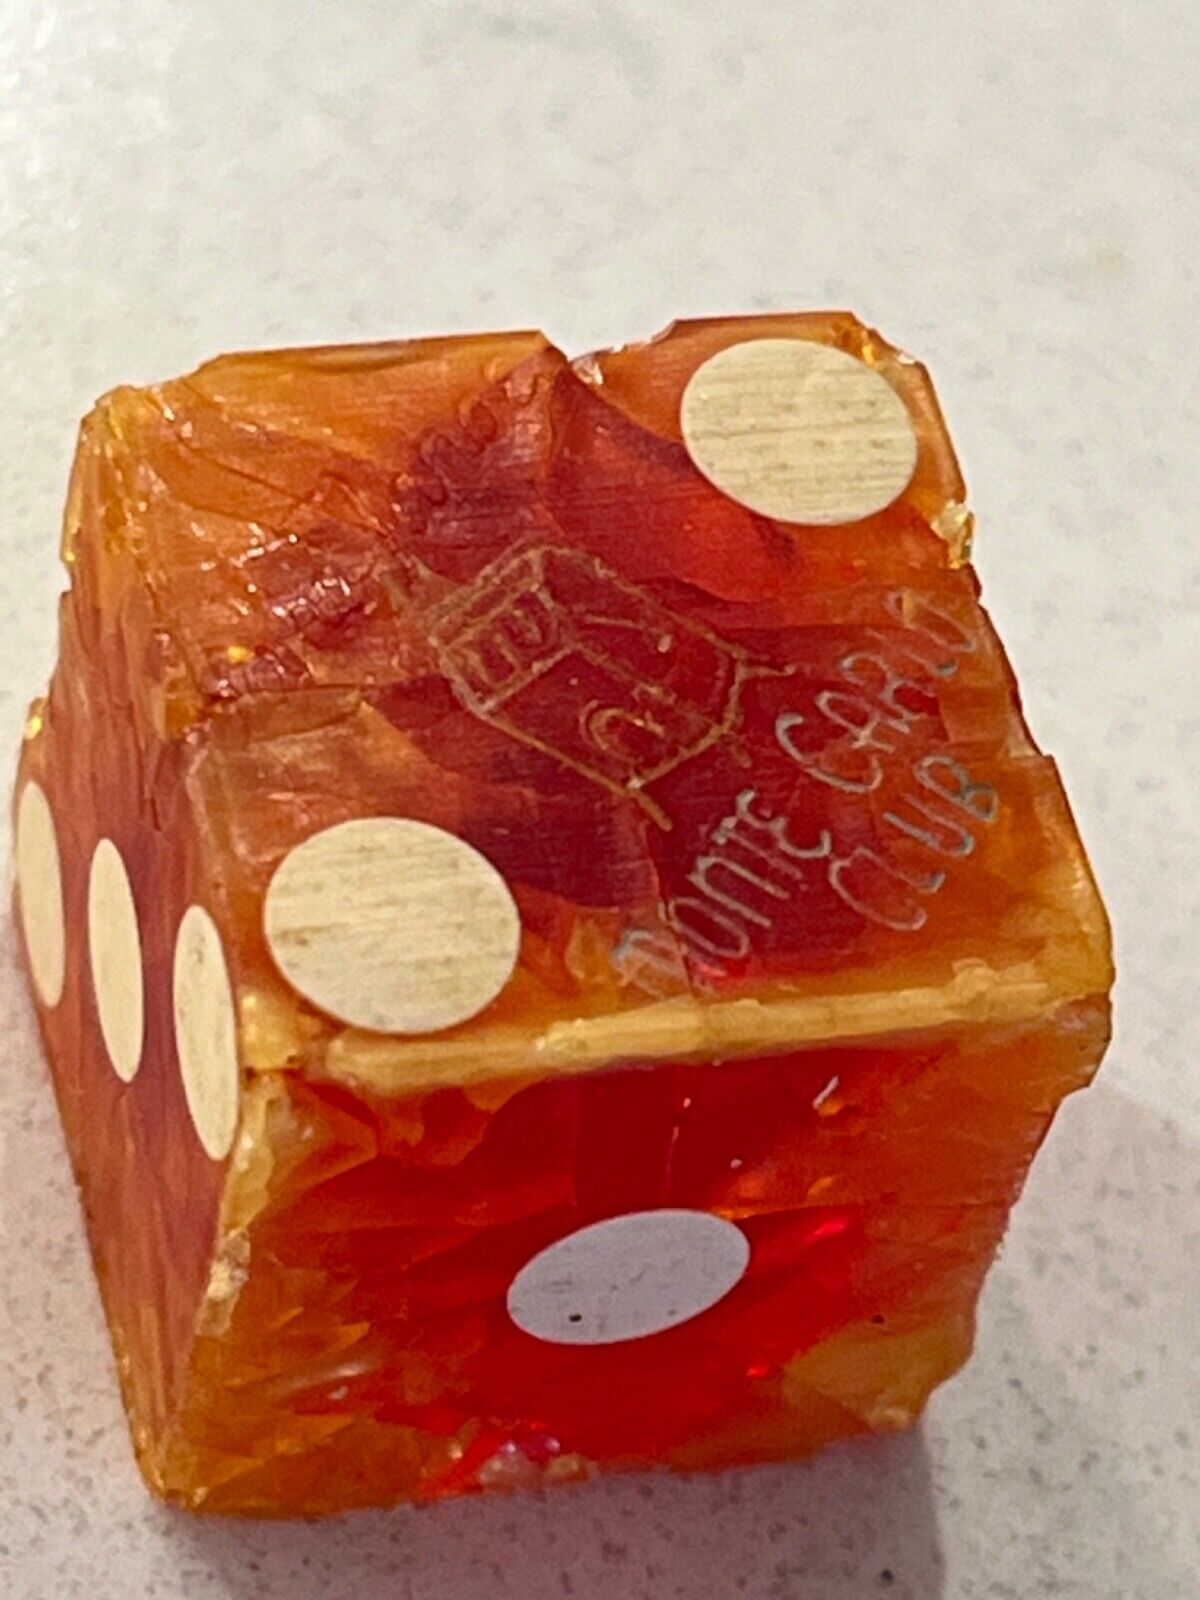 RAREST old Monte Carlo Club casino single dice remnant pips intact 070819bB